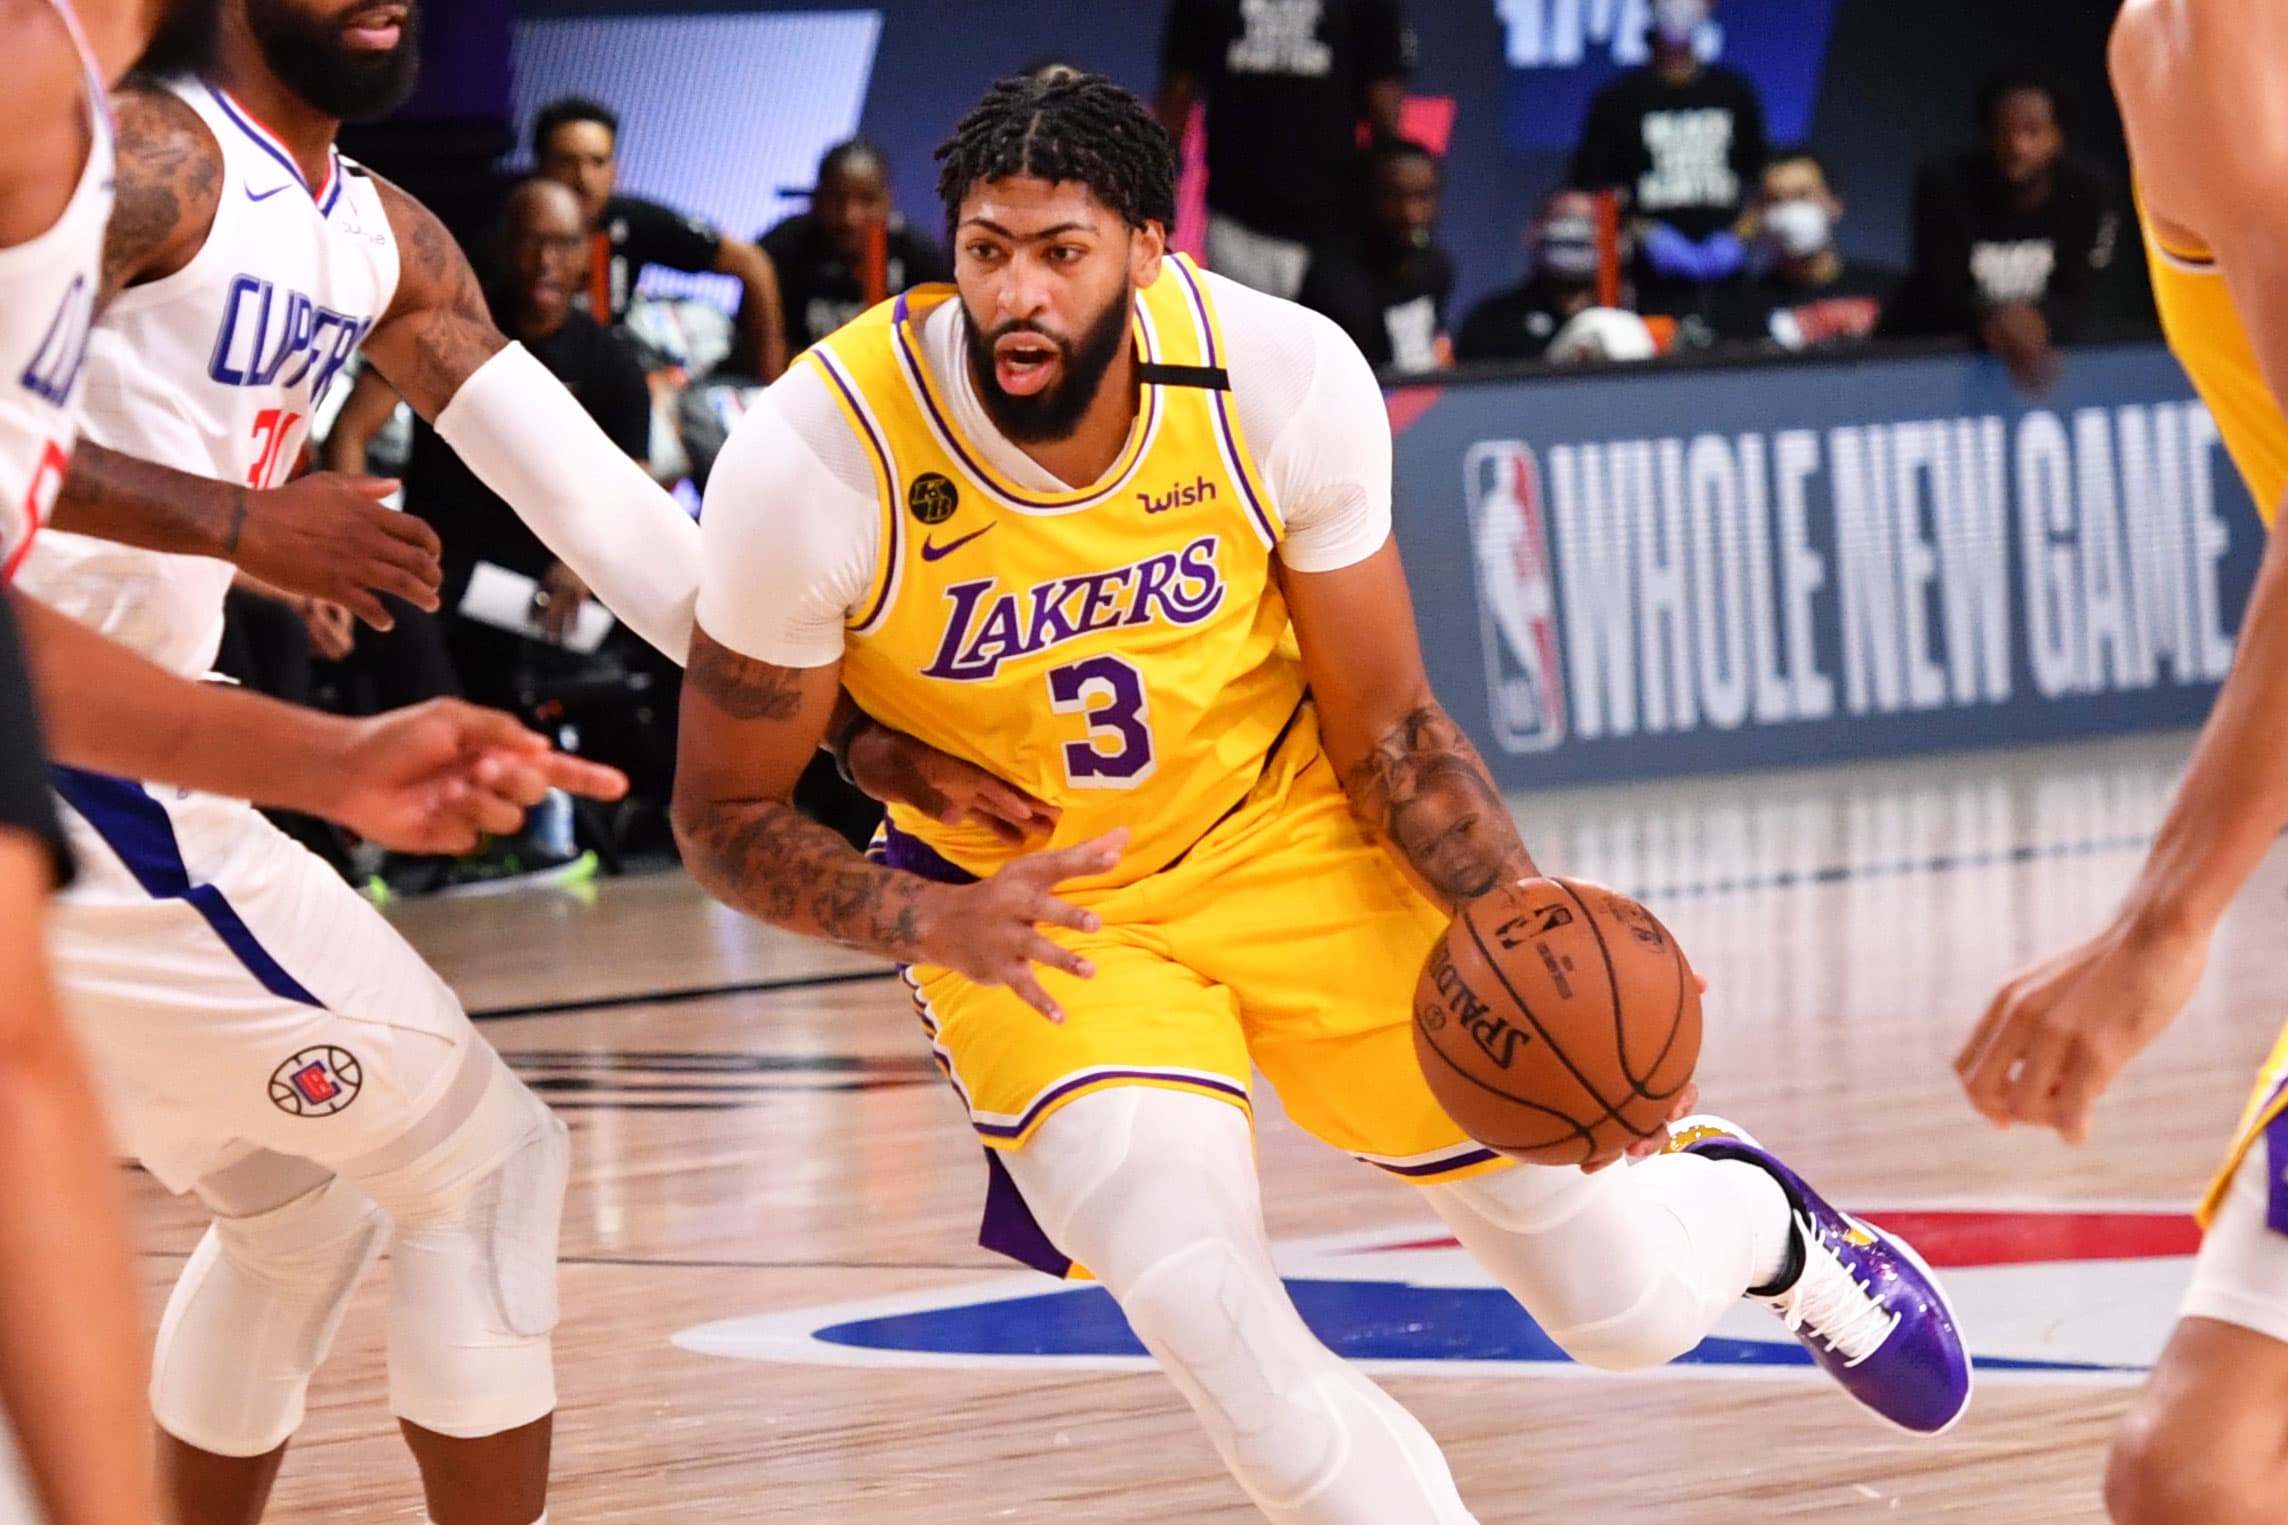 Turner Sports' NBA return doubleheader games drew an average of 2.9 million viewers - CNBC